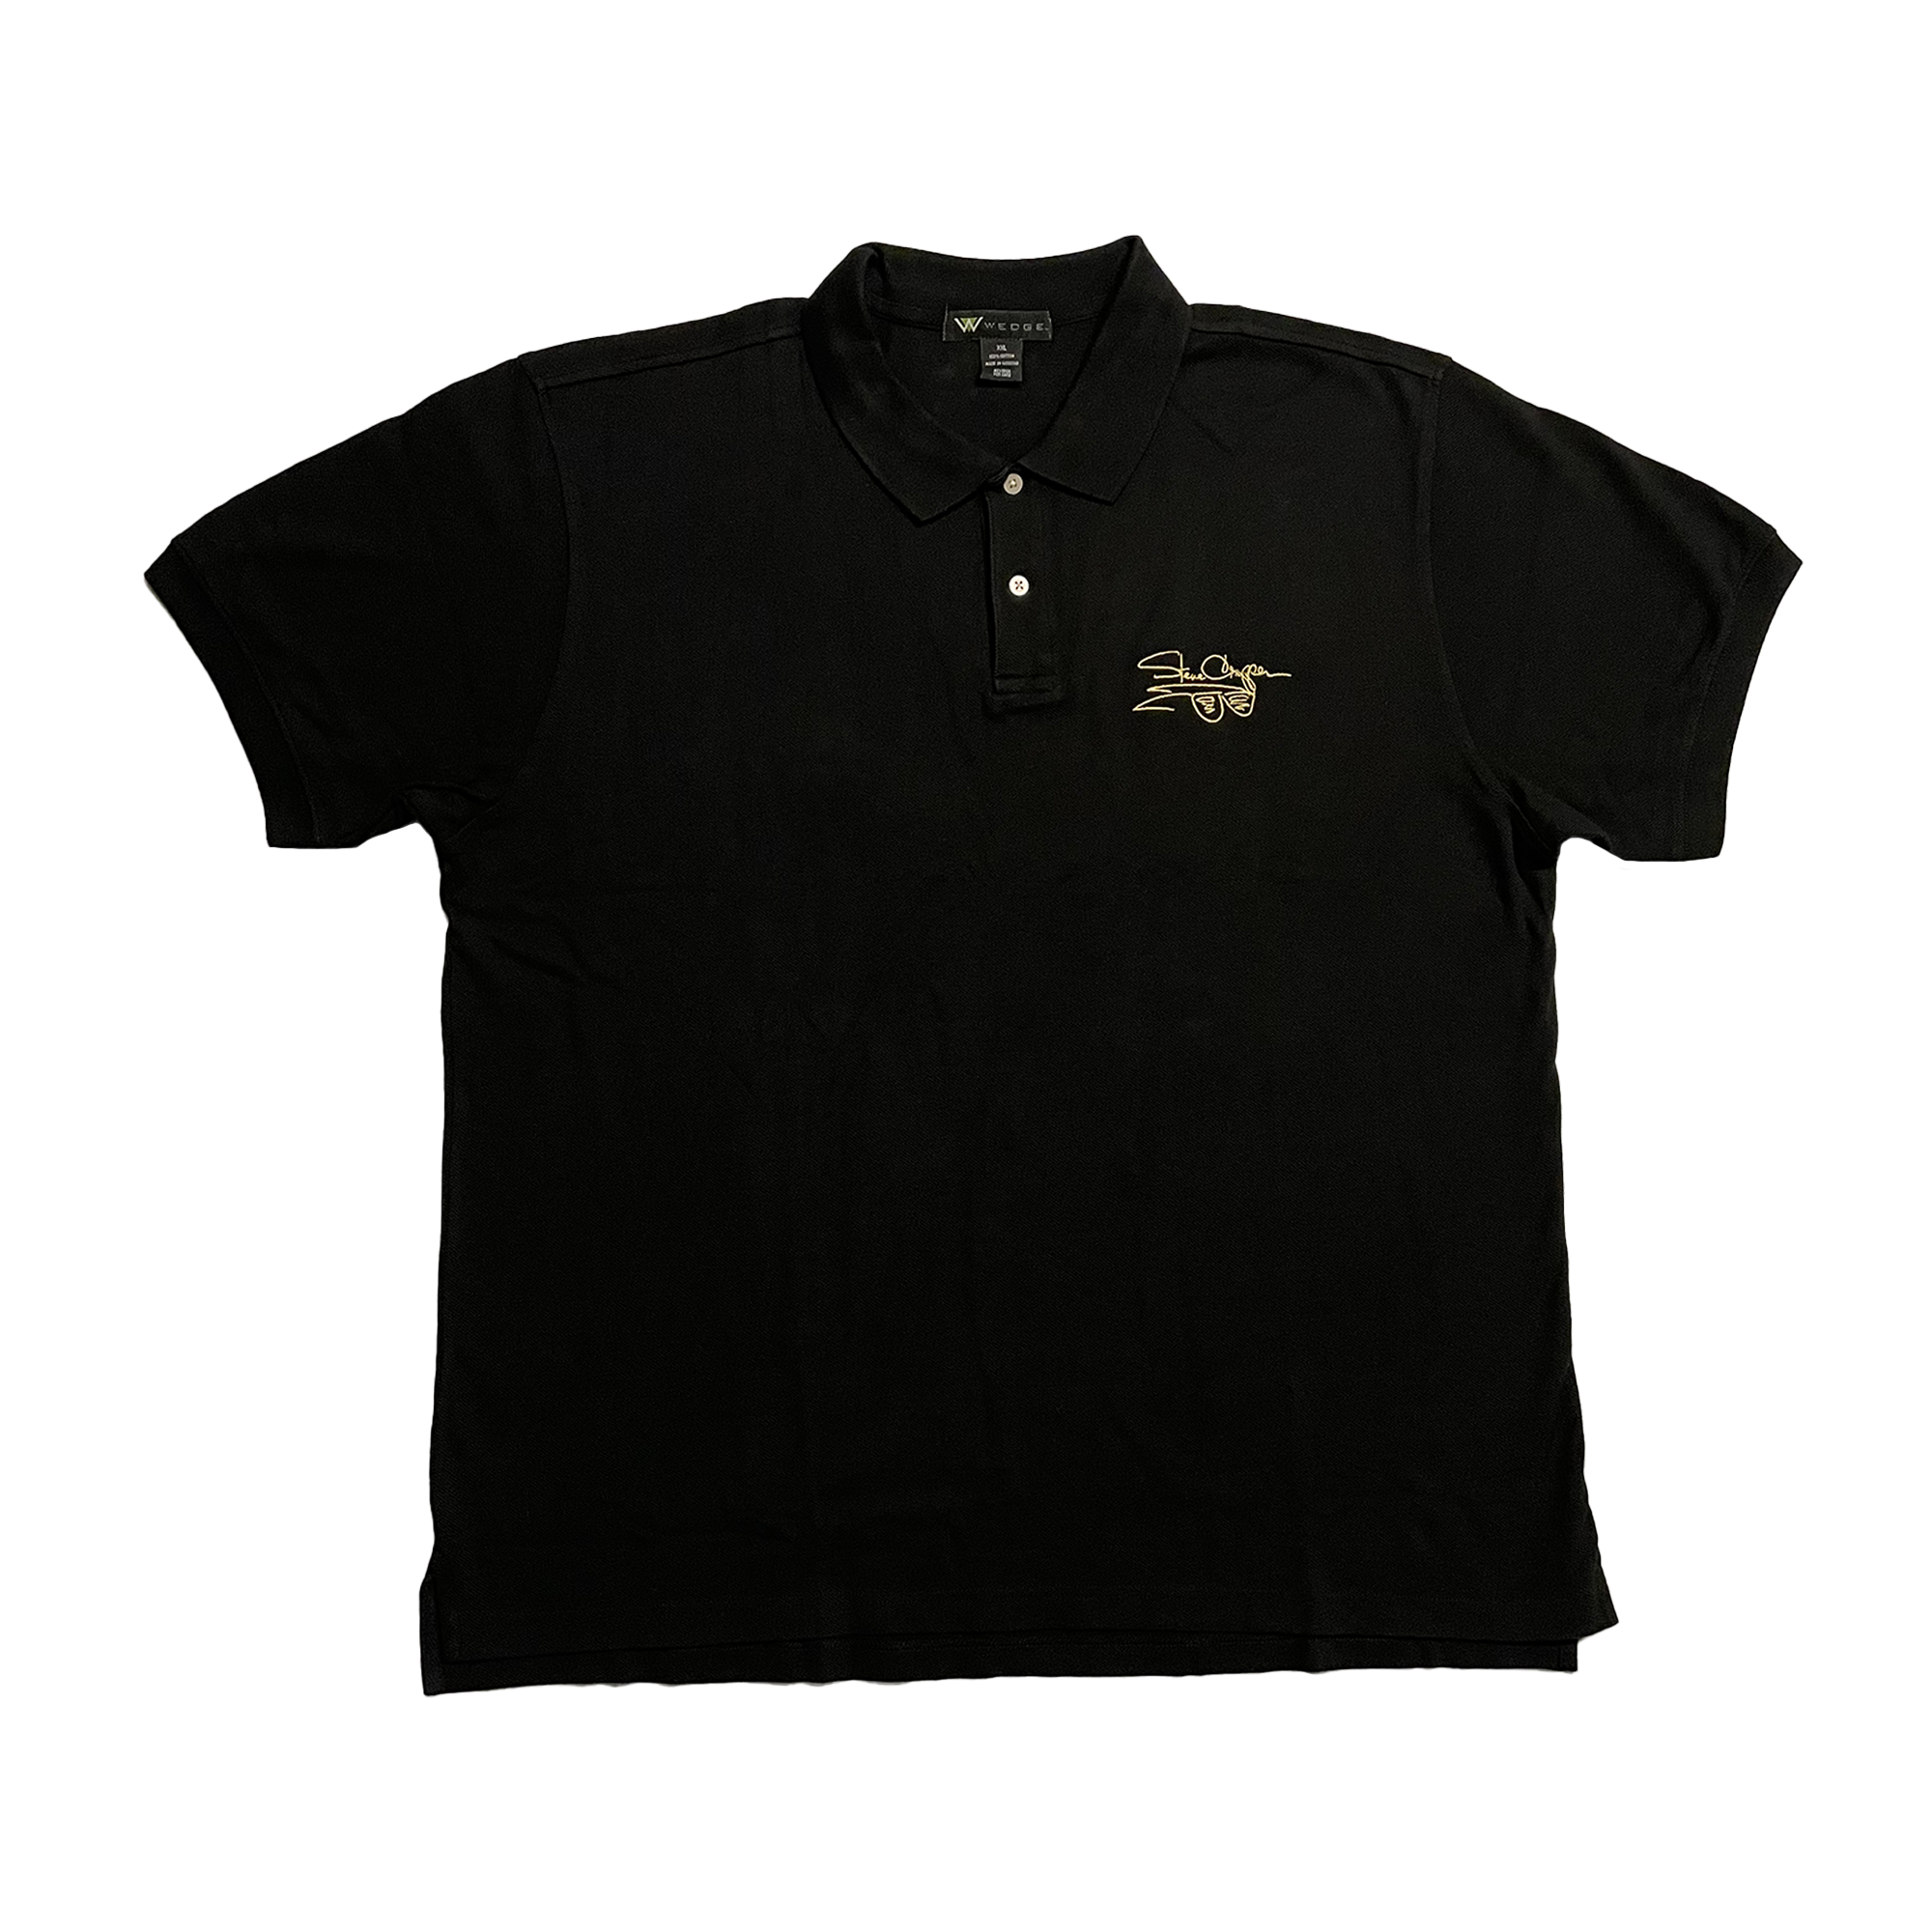 Steve Cropper - Embroidered Black Polo Shirt